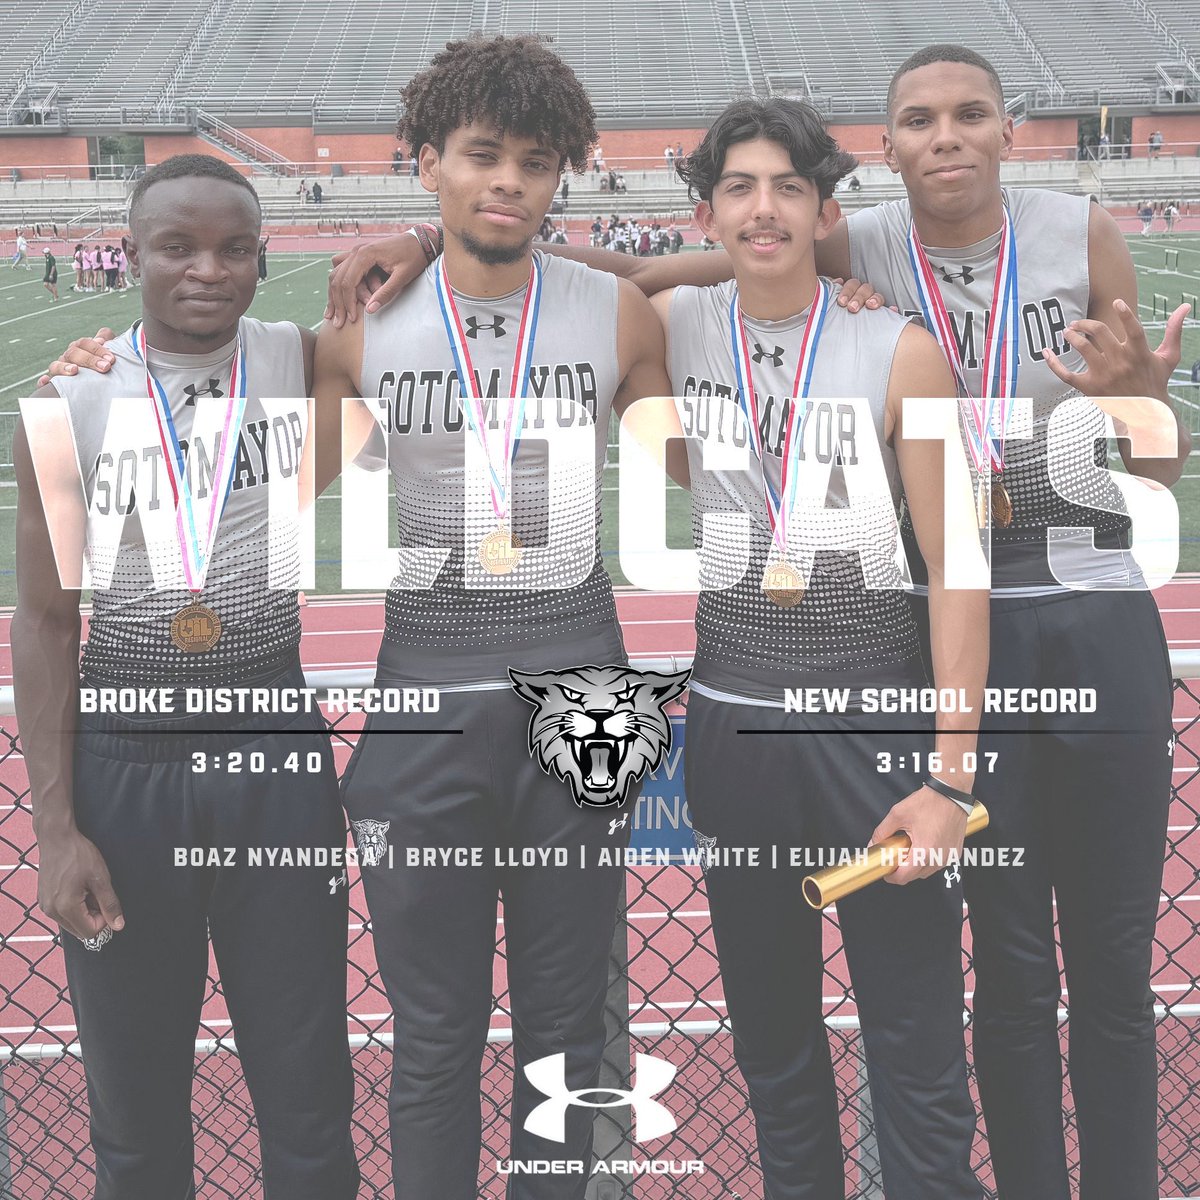 ‼️🚨WILDCAT COUNTRY🚨‼️ Can’t say enough about these 4 young men.They battled week in and week out. Ultimately breaking The District Record and setting new School Records, that will be the STANDARD for years to come.💪🏽Thank you for the memories. Now And Forever Wildcats 🐾 #CATS